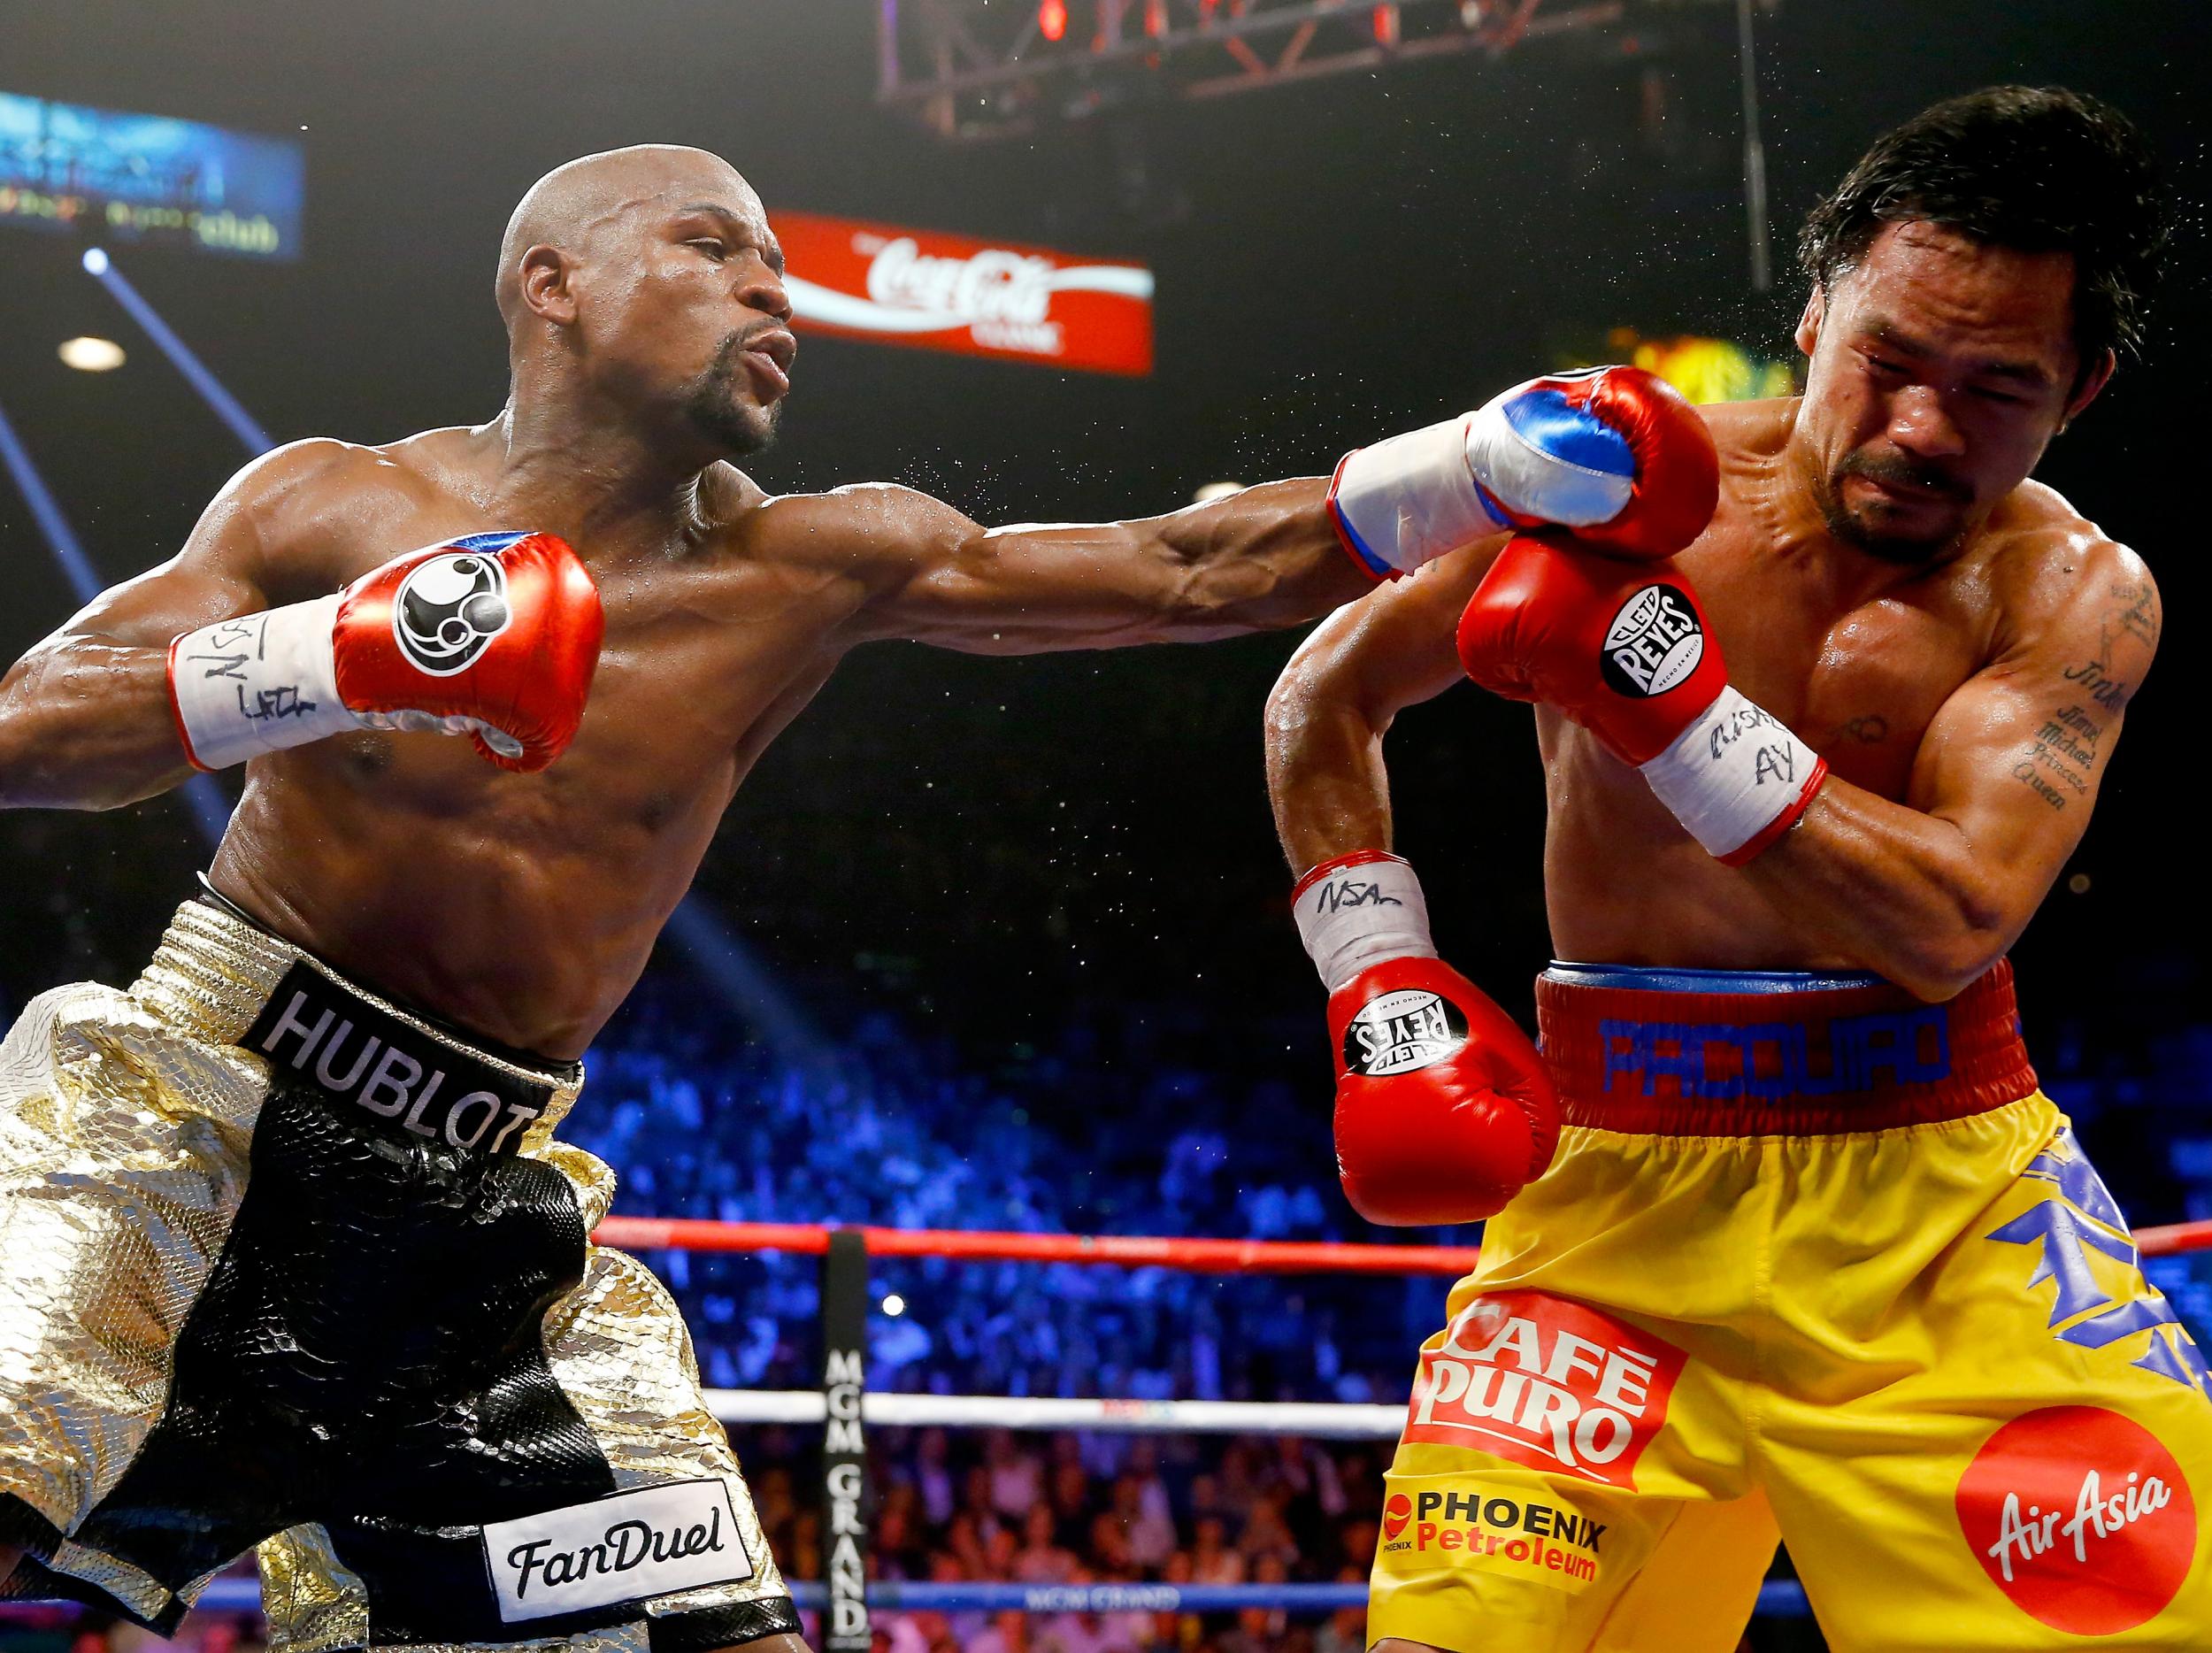 Mayweather got the better of Pacquaio in the 'Fight of the Century'